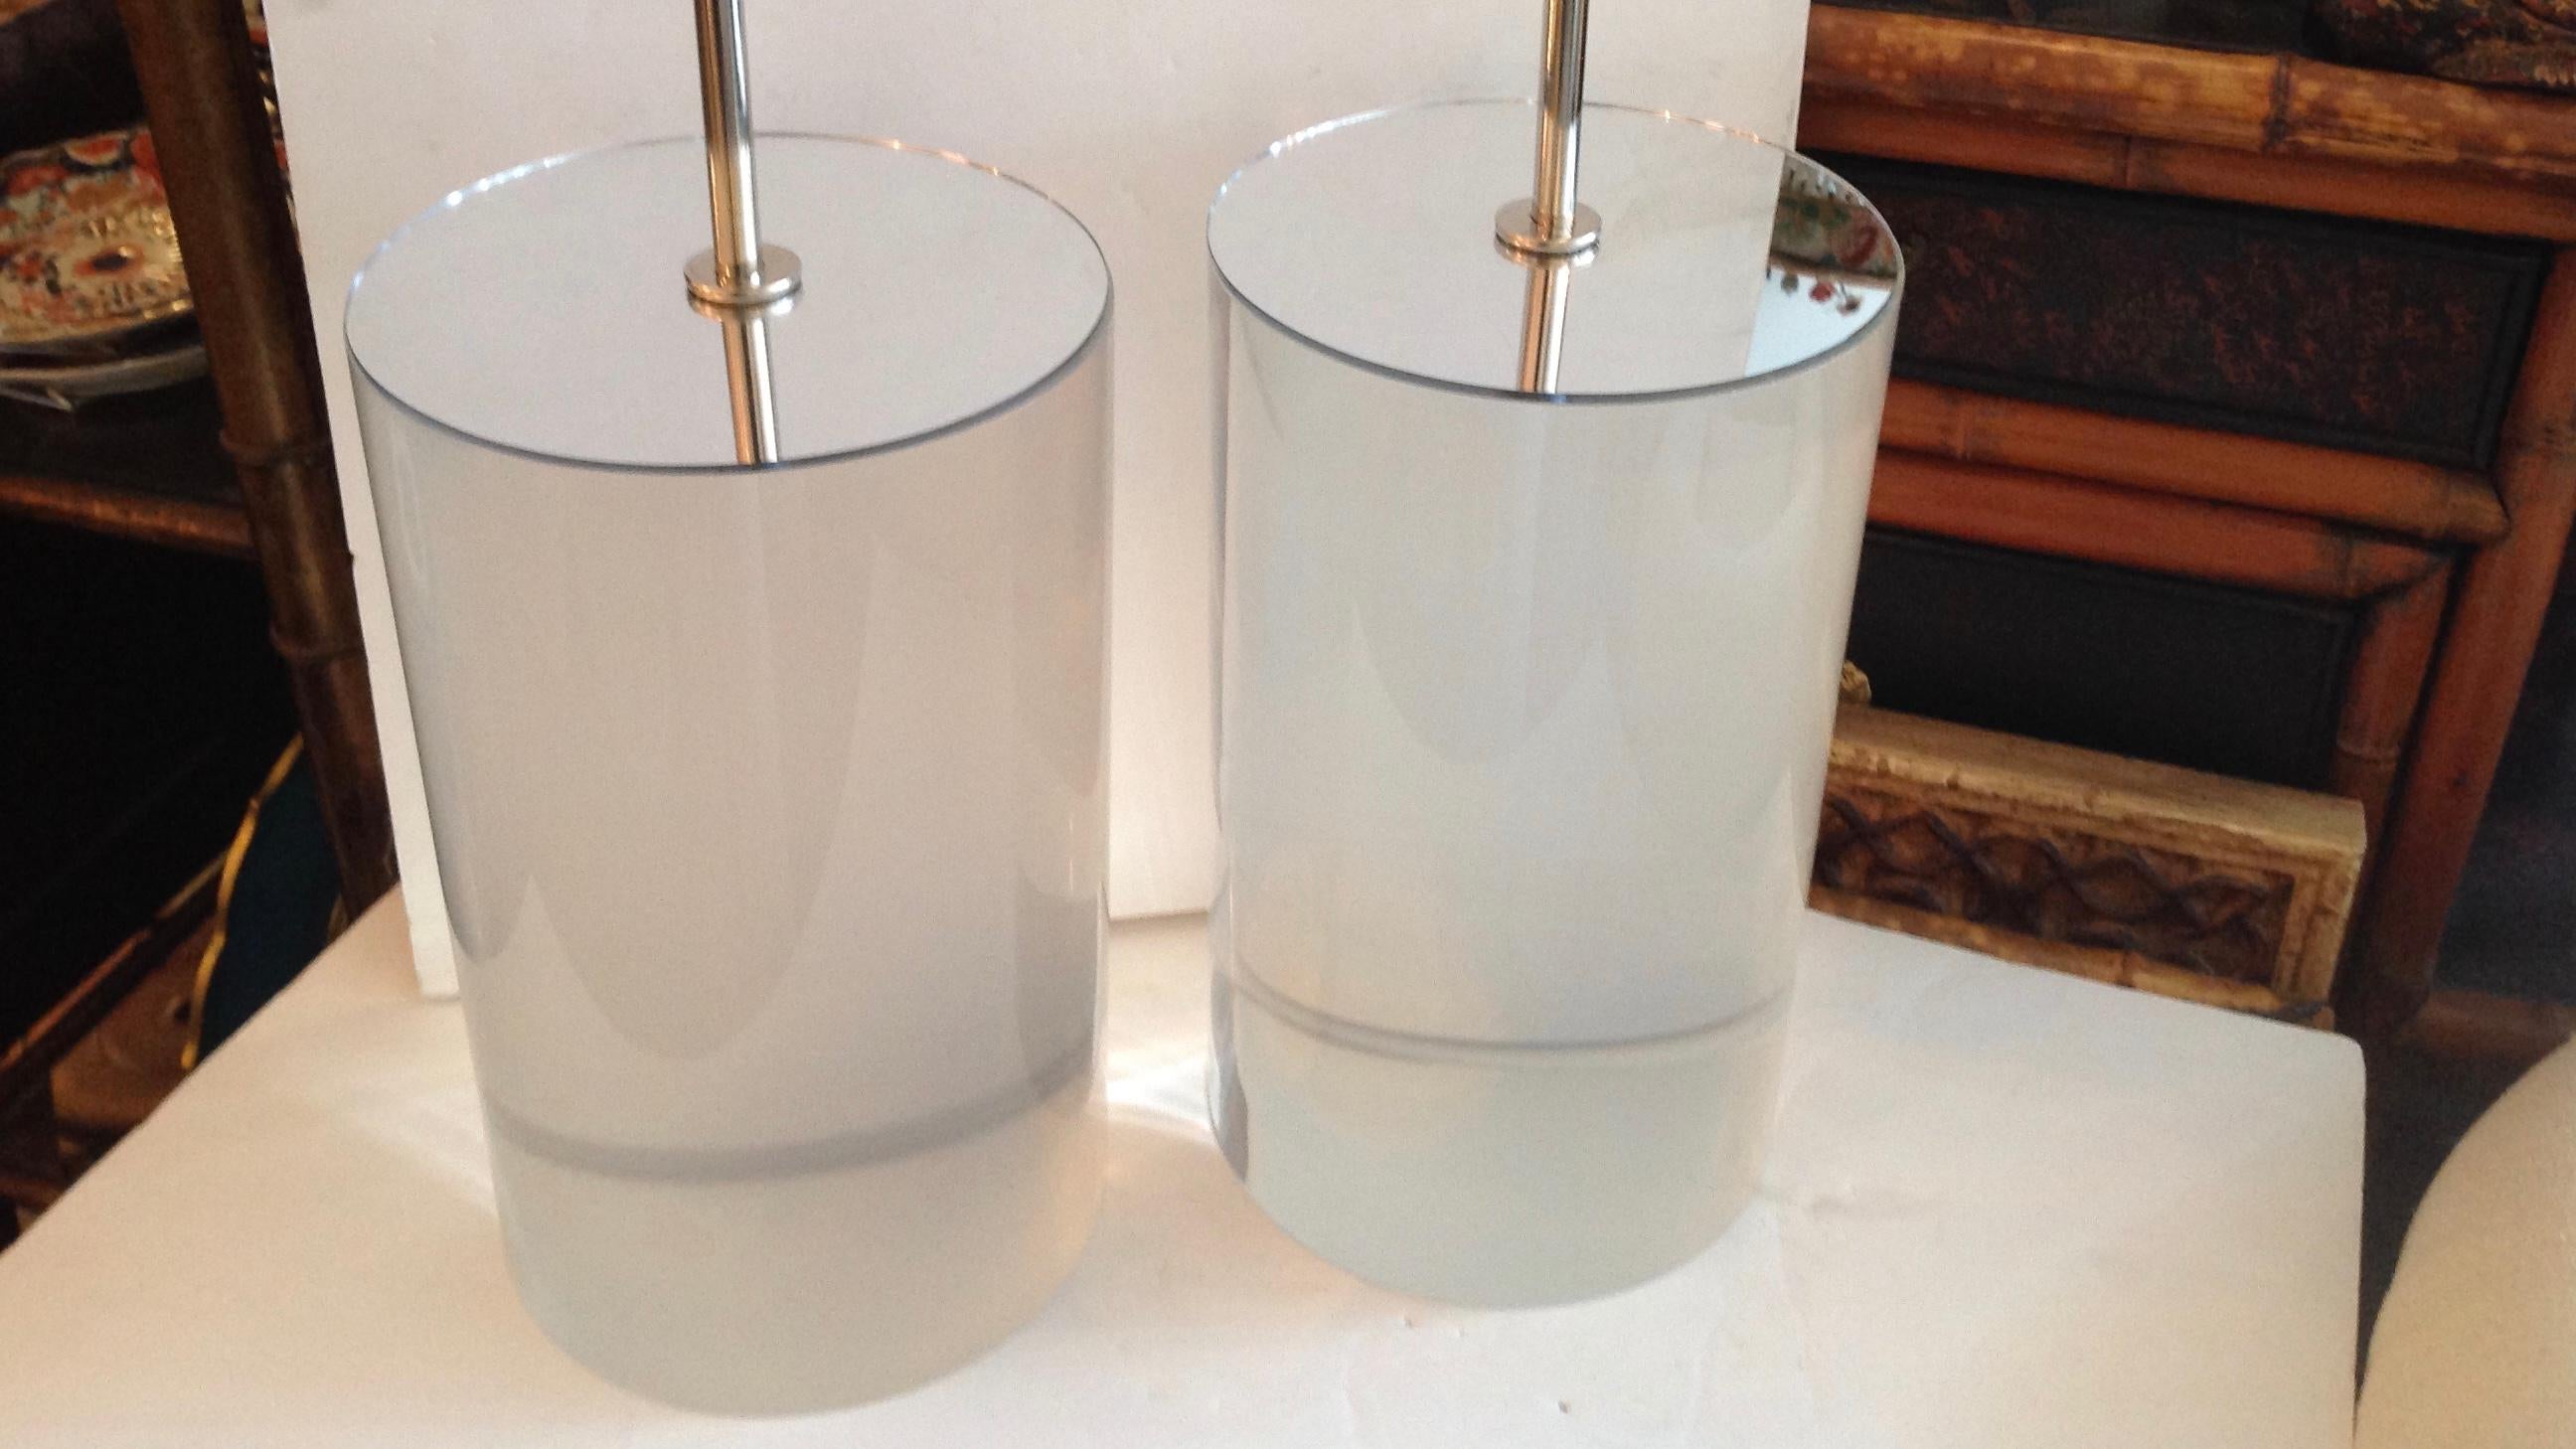 Superbly fashioned with mirrored tops and chrome-plated fittings.
Lamps measured to finials. Lucite bases are 13.5